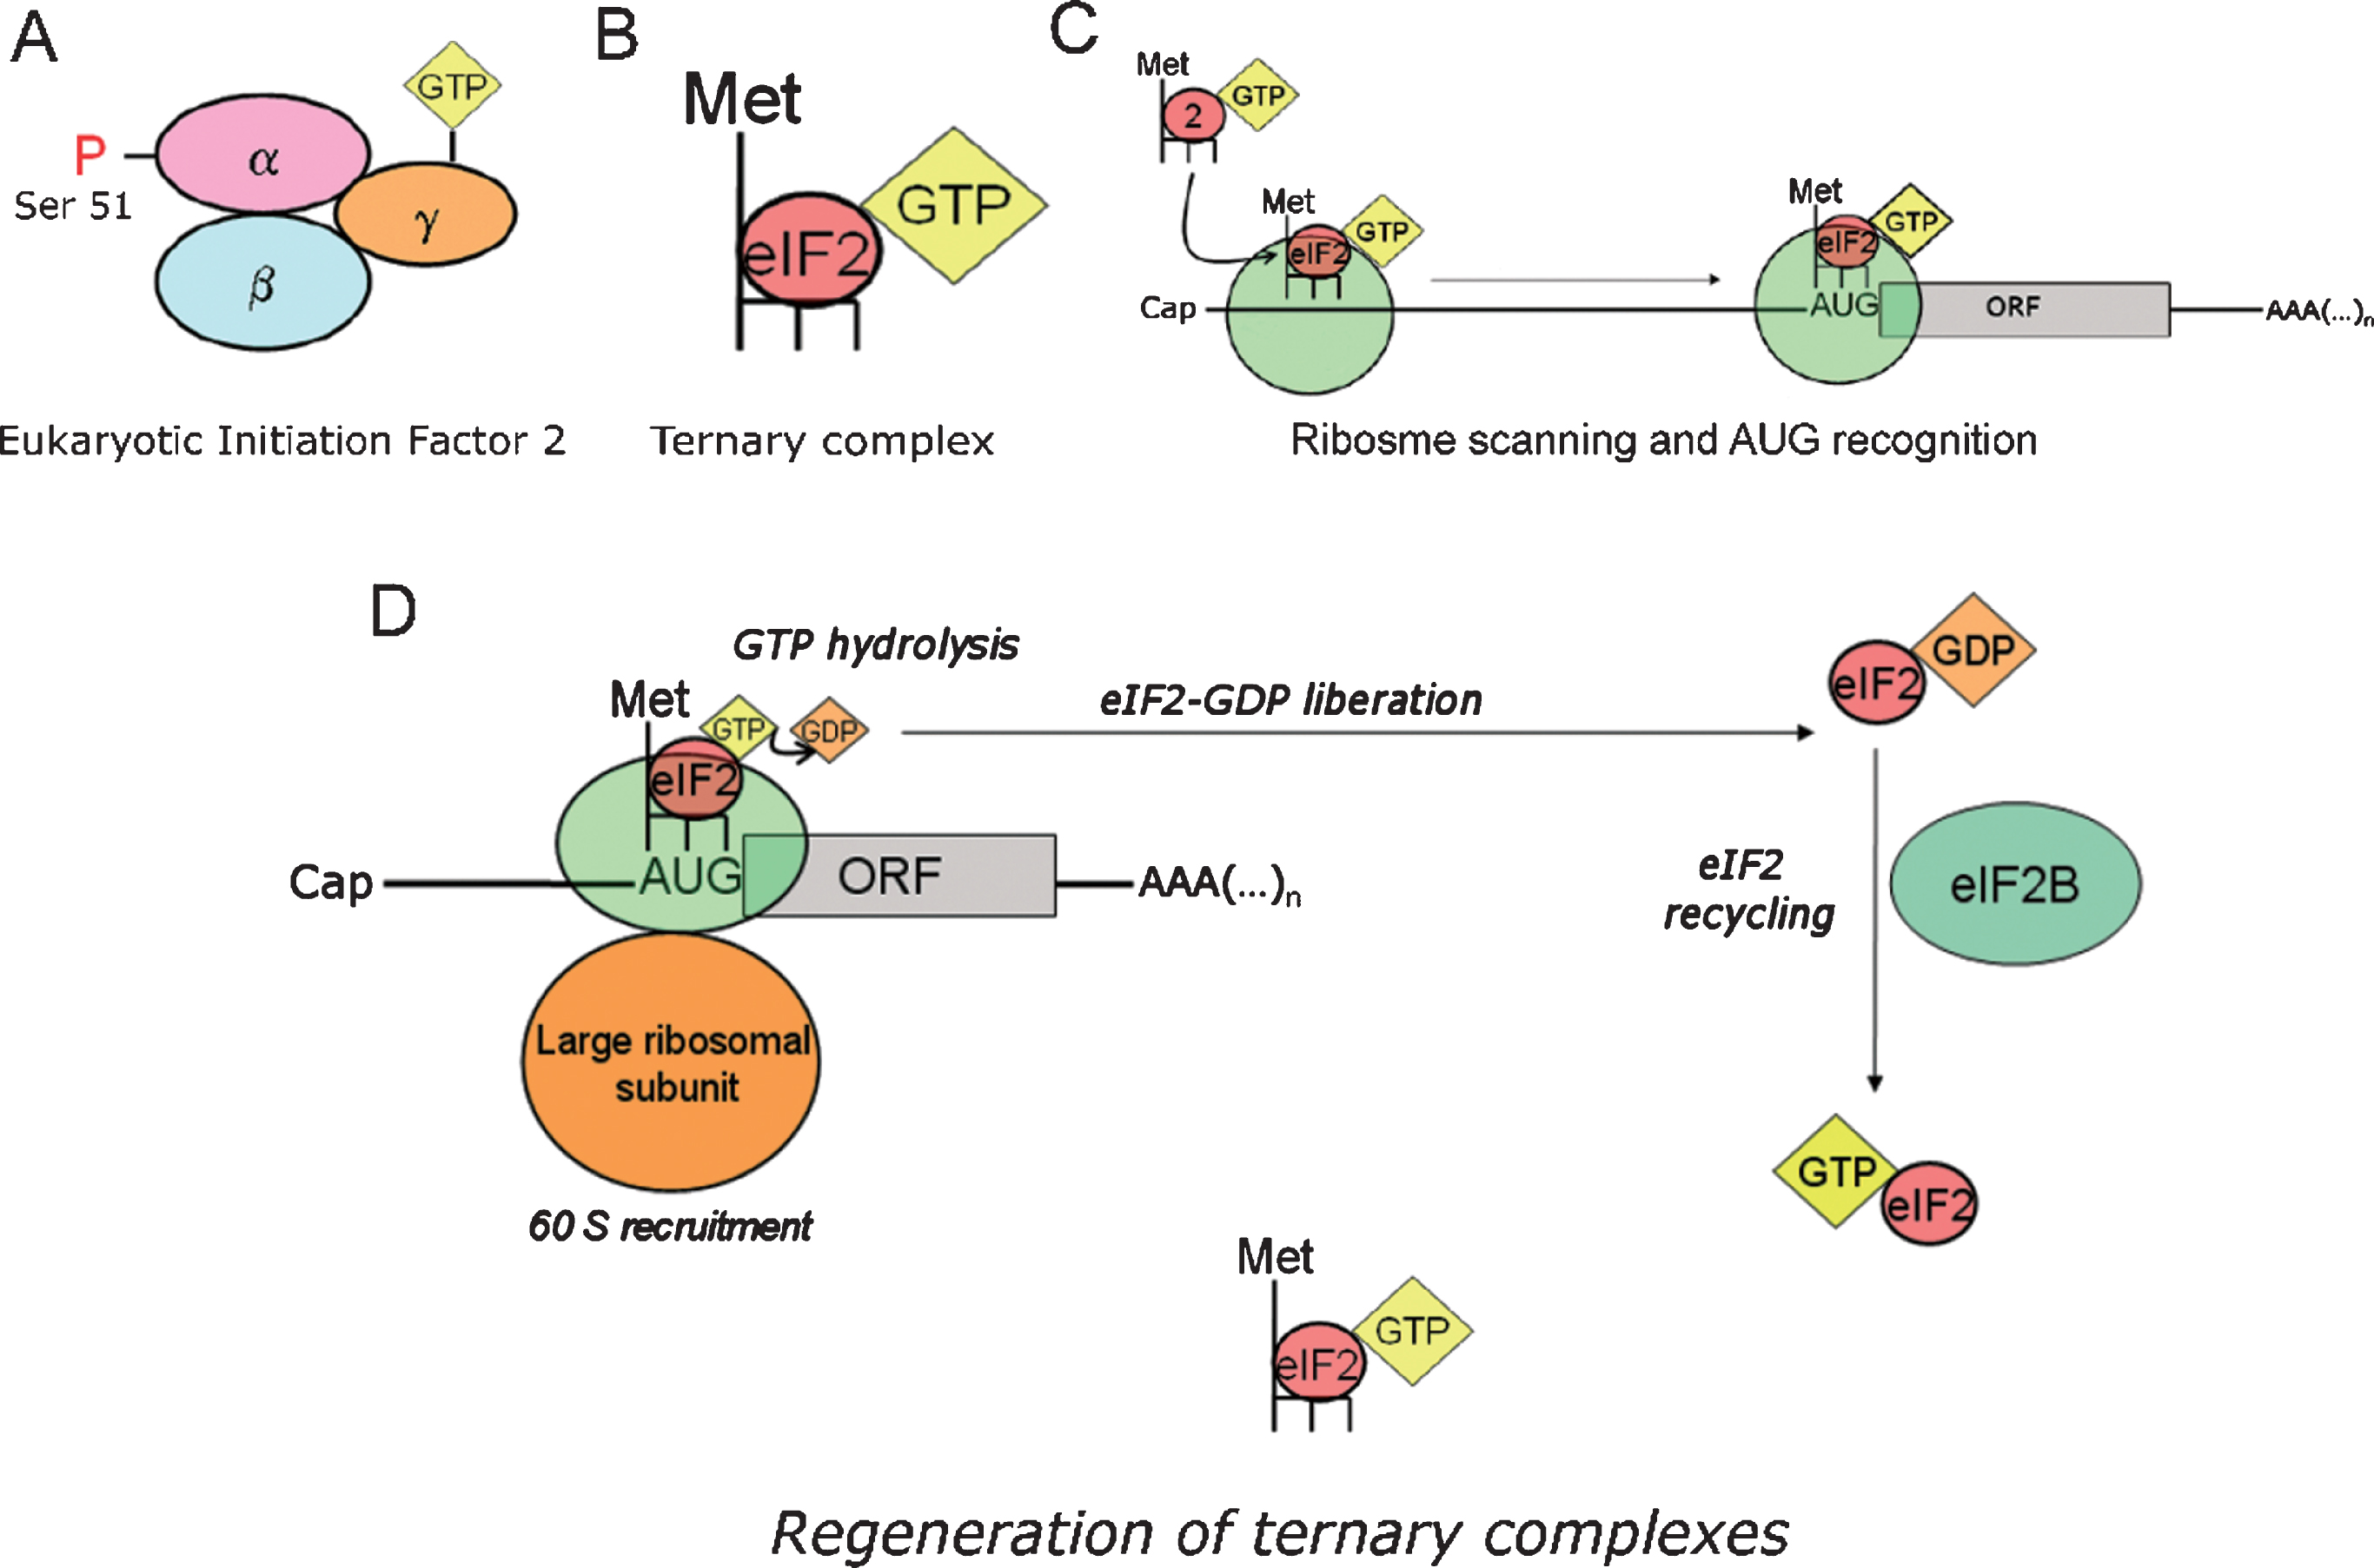 Role of ternary complexes in translation initiation. eIF2 recycling & ternary complexes regeneration. A) Eukaryotic initiation factor 2 (eIF2) is a heterotrimeric protein consisting in three subunits (α, β, γ). eIF2 binds a GTP molecule in its γ-subunit, while phosphorylation at serine 51 of the α-subunit modulates its interaction with eIF2B. B) eIF2 forms a ternary complex with the initiator transfer RNA coupled to the corresponding Methionine (Met-tRNAi), and a GTP molecule docked at the γ-subunit of eIF2. Note that tRNAi appears depicted in the diagram as a dark backbone finishing with three tips symbolizing the anticodon. C) Ternary complexes (the formation of which is thermodynamically favored by eIF2-GTP) are loaded in to the 40S ribosomal thanks to the intervention of other translation factors. D) Translation initiation is a GTP-dependent process. The energy resulting from the hydrolysis of the eIF2-bound GTP is required for initiation codon recognition and commitment of the ribosome to complete the initiation pathway. As a result, a low energy eIF2-GDP complex is released after each round of translation initiation. eIF2B is the guanine exchange factor (GEF) refueling eIF2 with new energy-rich GTP molecules. This process yields new active ternary complexes ready to engage in new cycles of translation initiation.